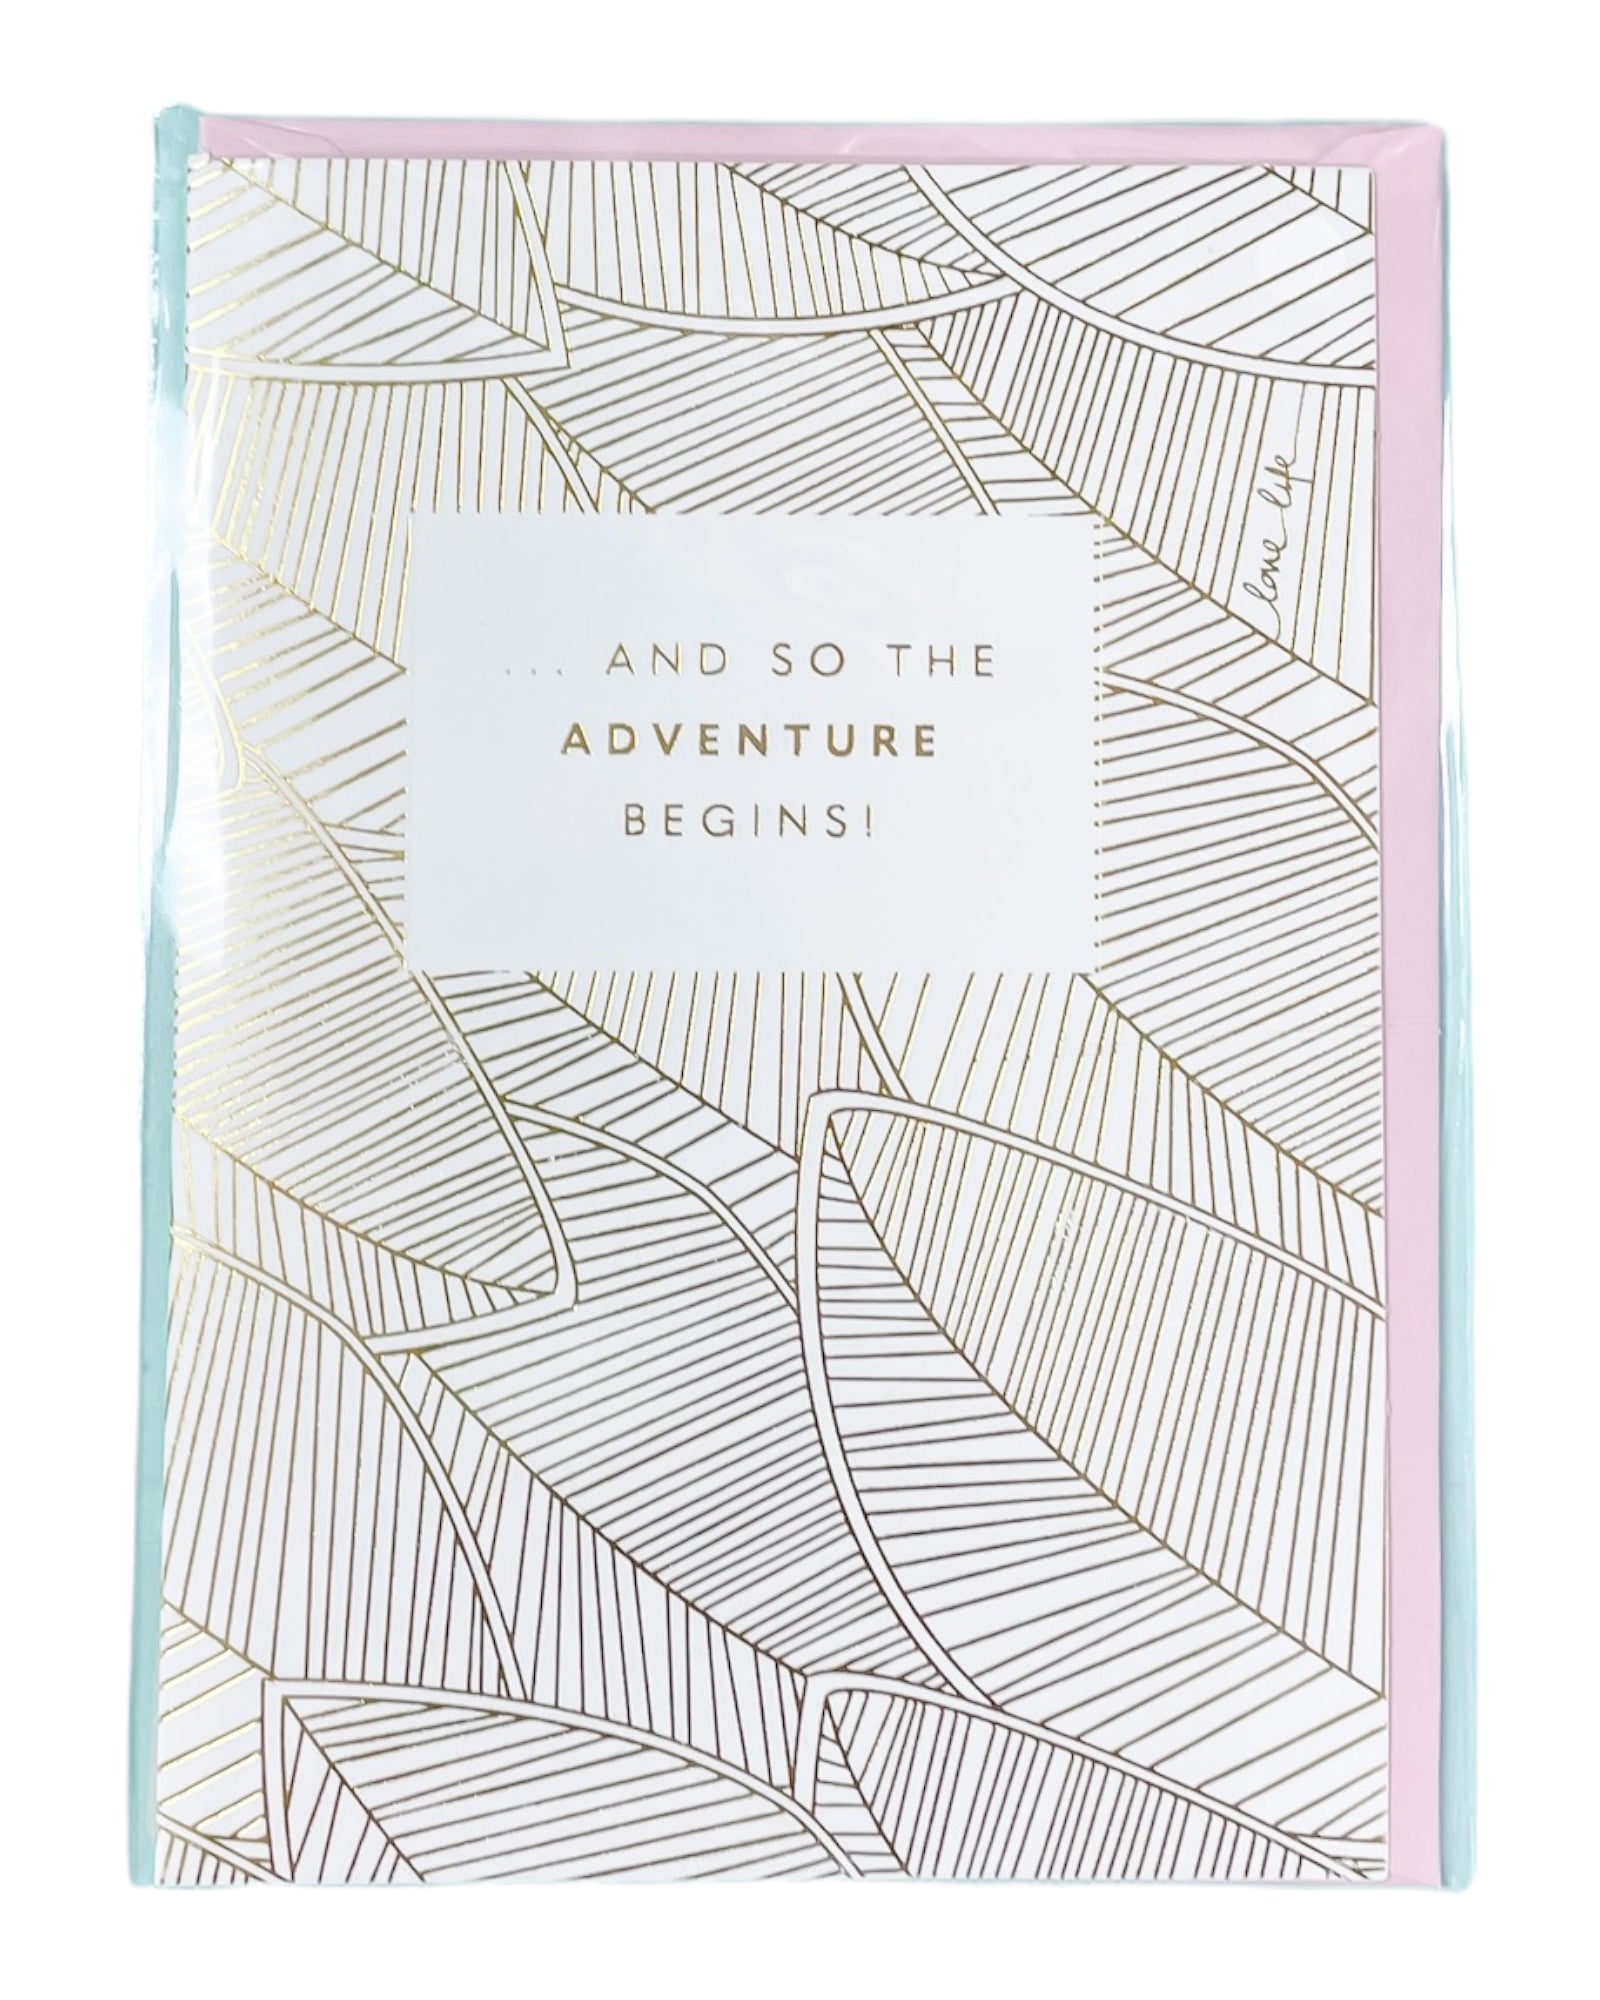 KL Gold Foil Greeting Card, And So The Adventure Begins